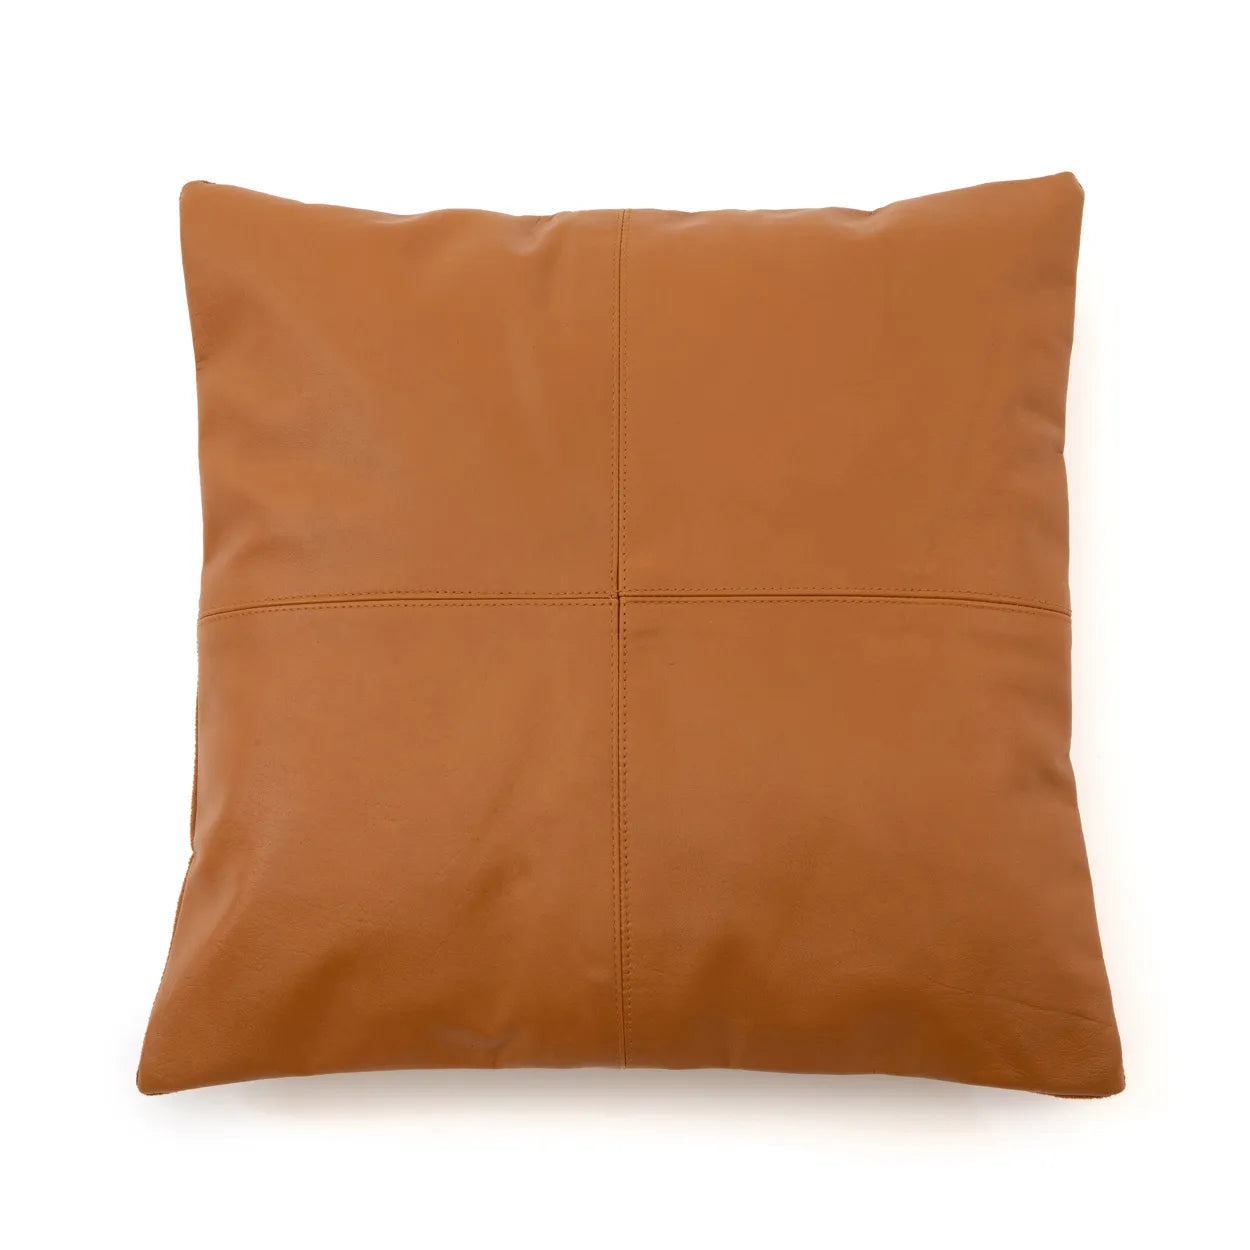 Calpe Chic Square Cushion - Leather & Fabric Pillow Cover